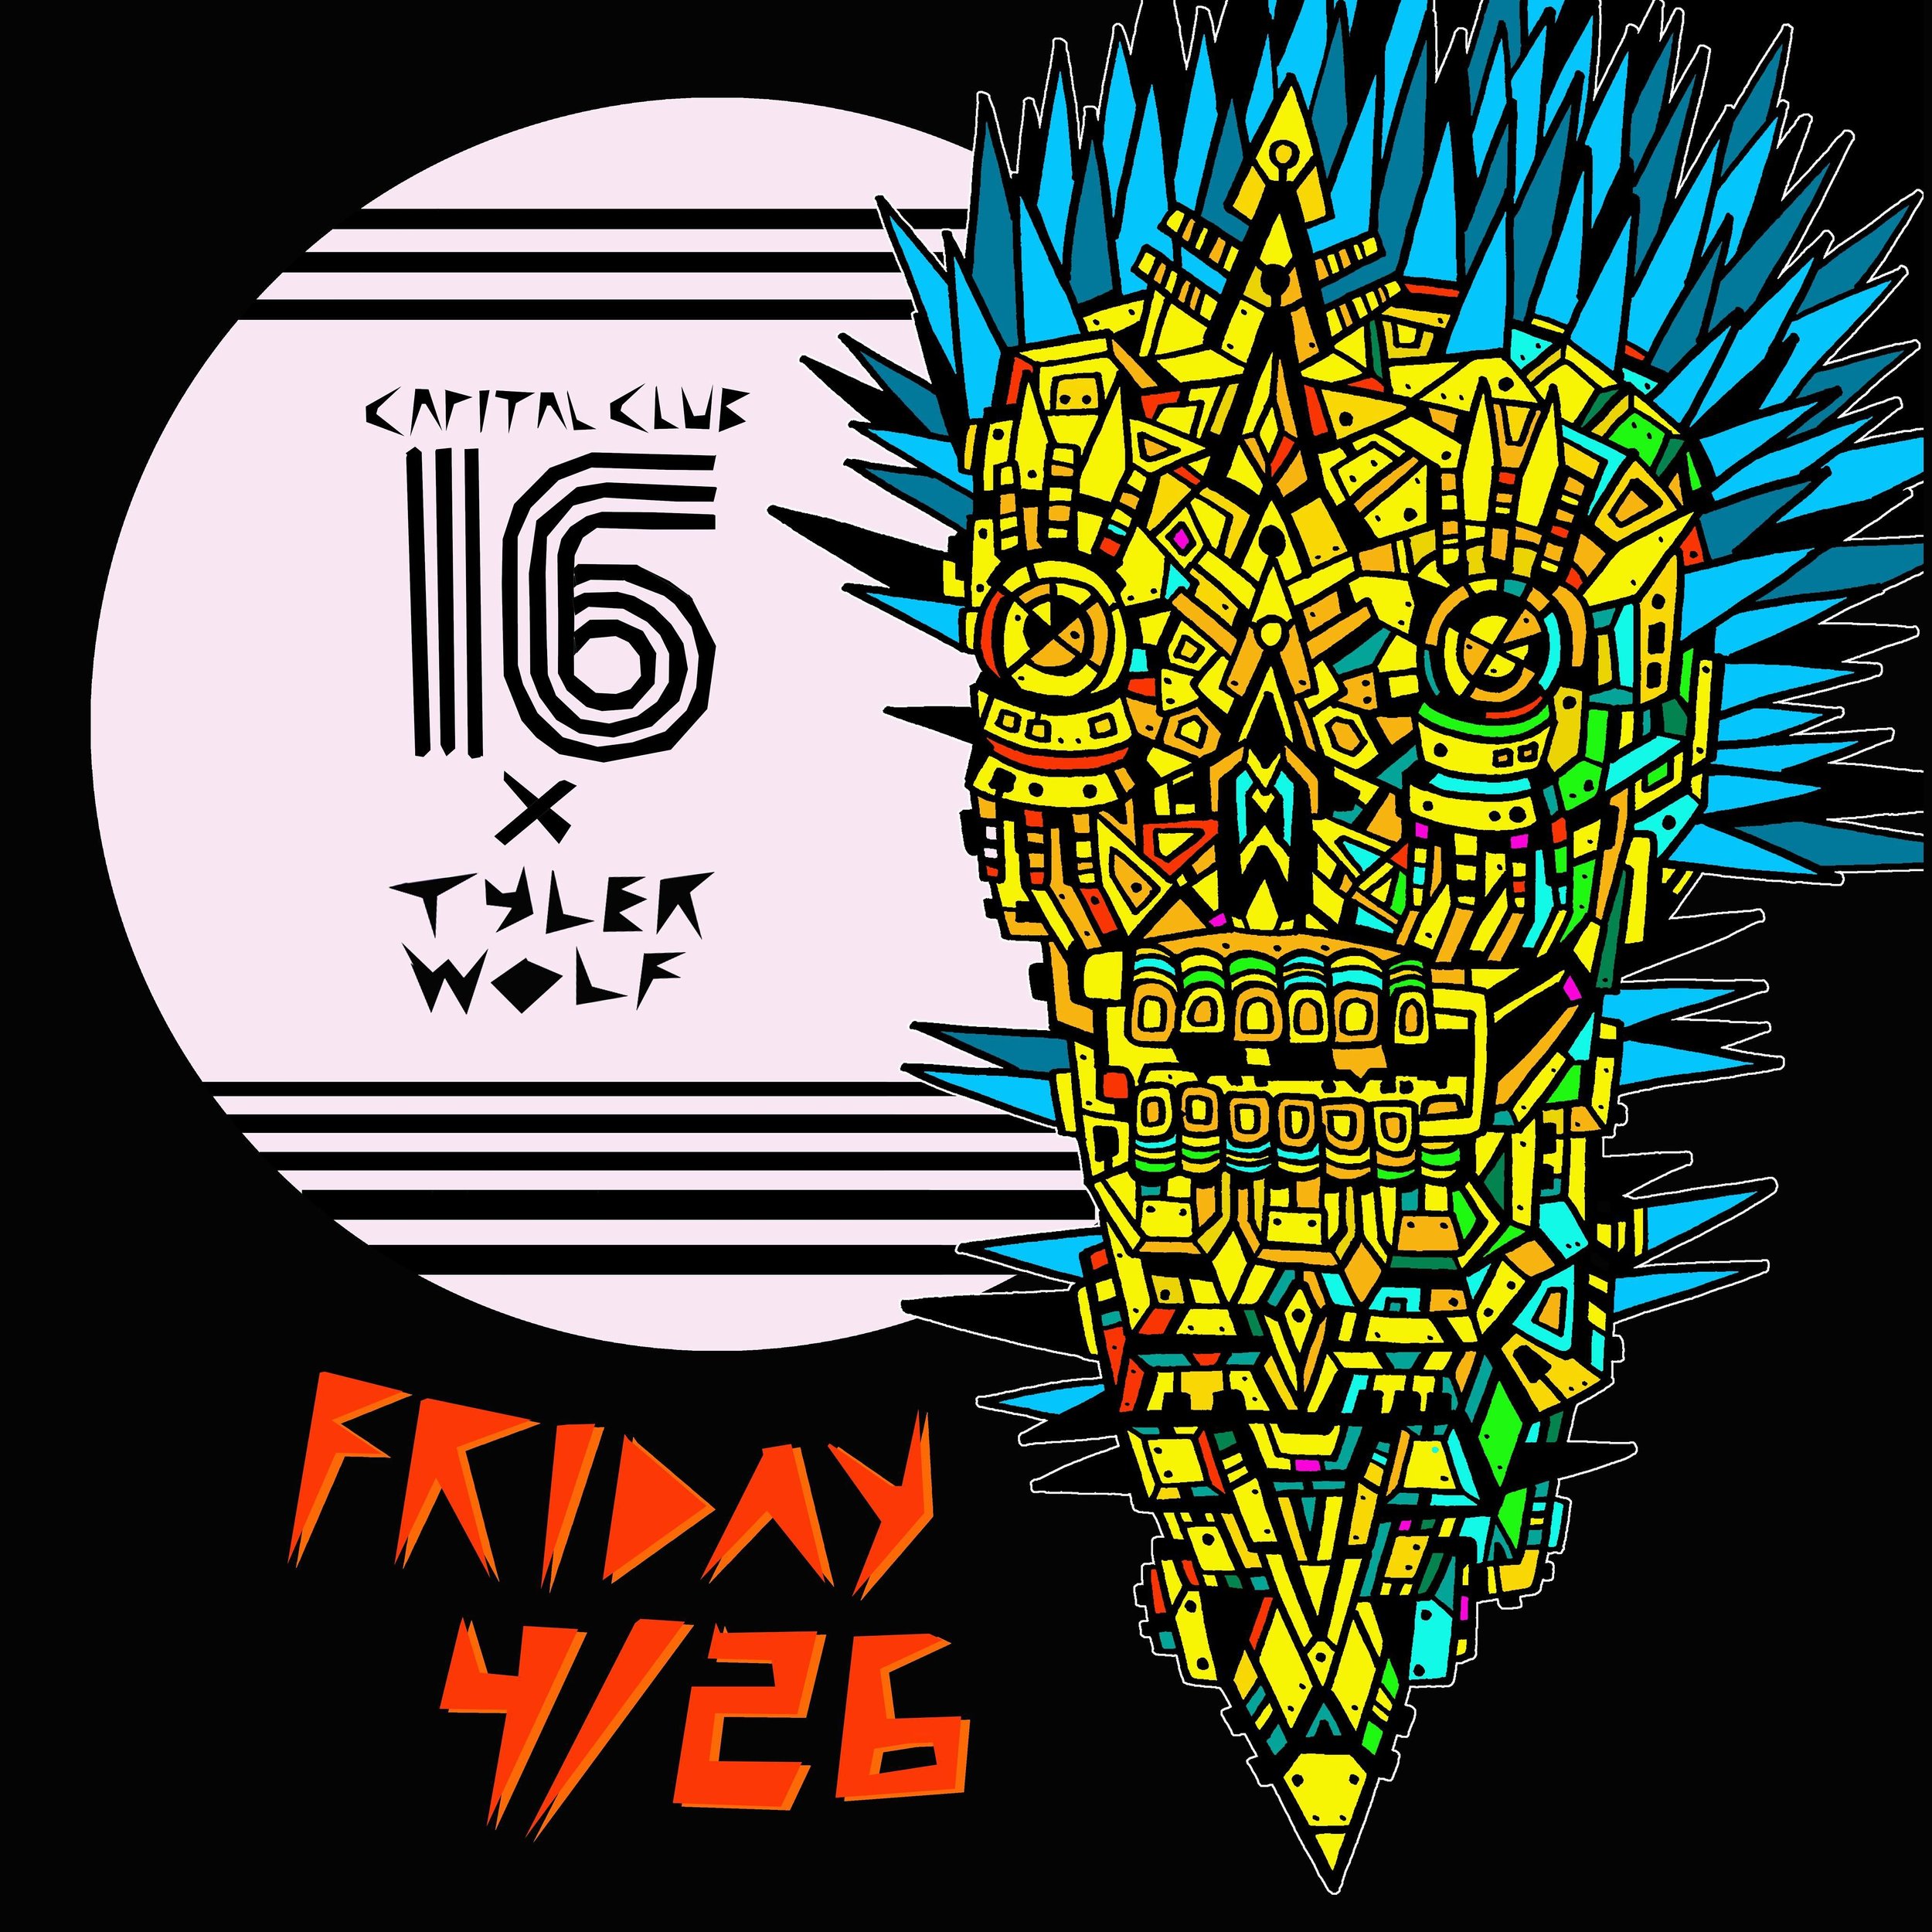 This Friday is our Final Friday Throwback with brother @wolfnite 
An evening of classic CC16 dishes, Hofbrau on tap, great tunes and definitely great art. A nod to those First Friday nights when our block caught lightening in the bottle and the energ